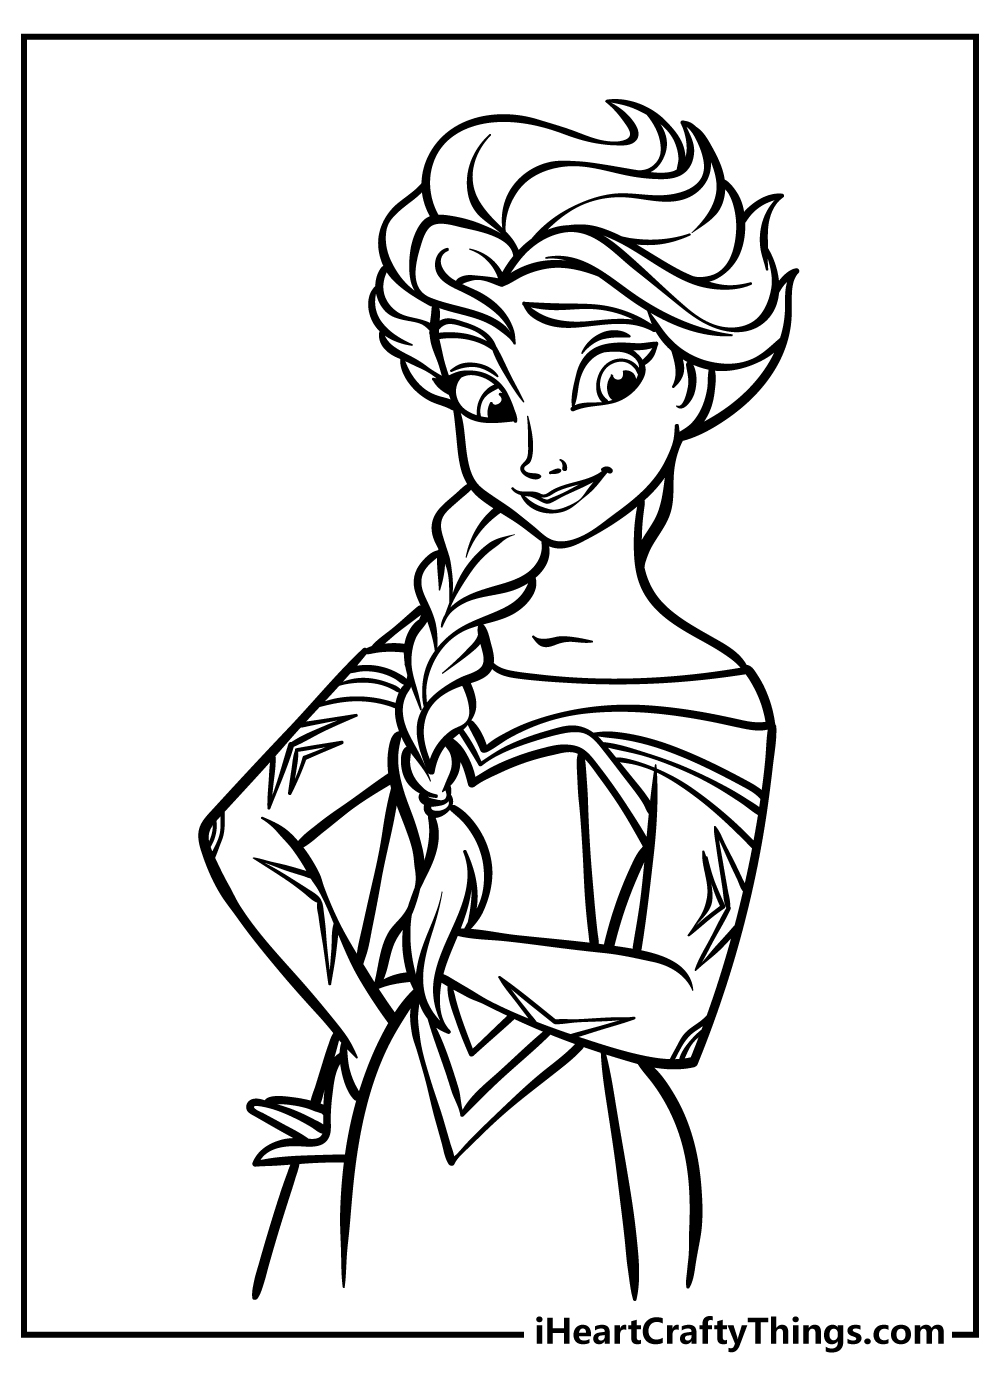 Elsa and Anna coloring pages free printable